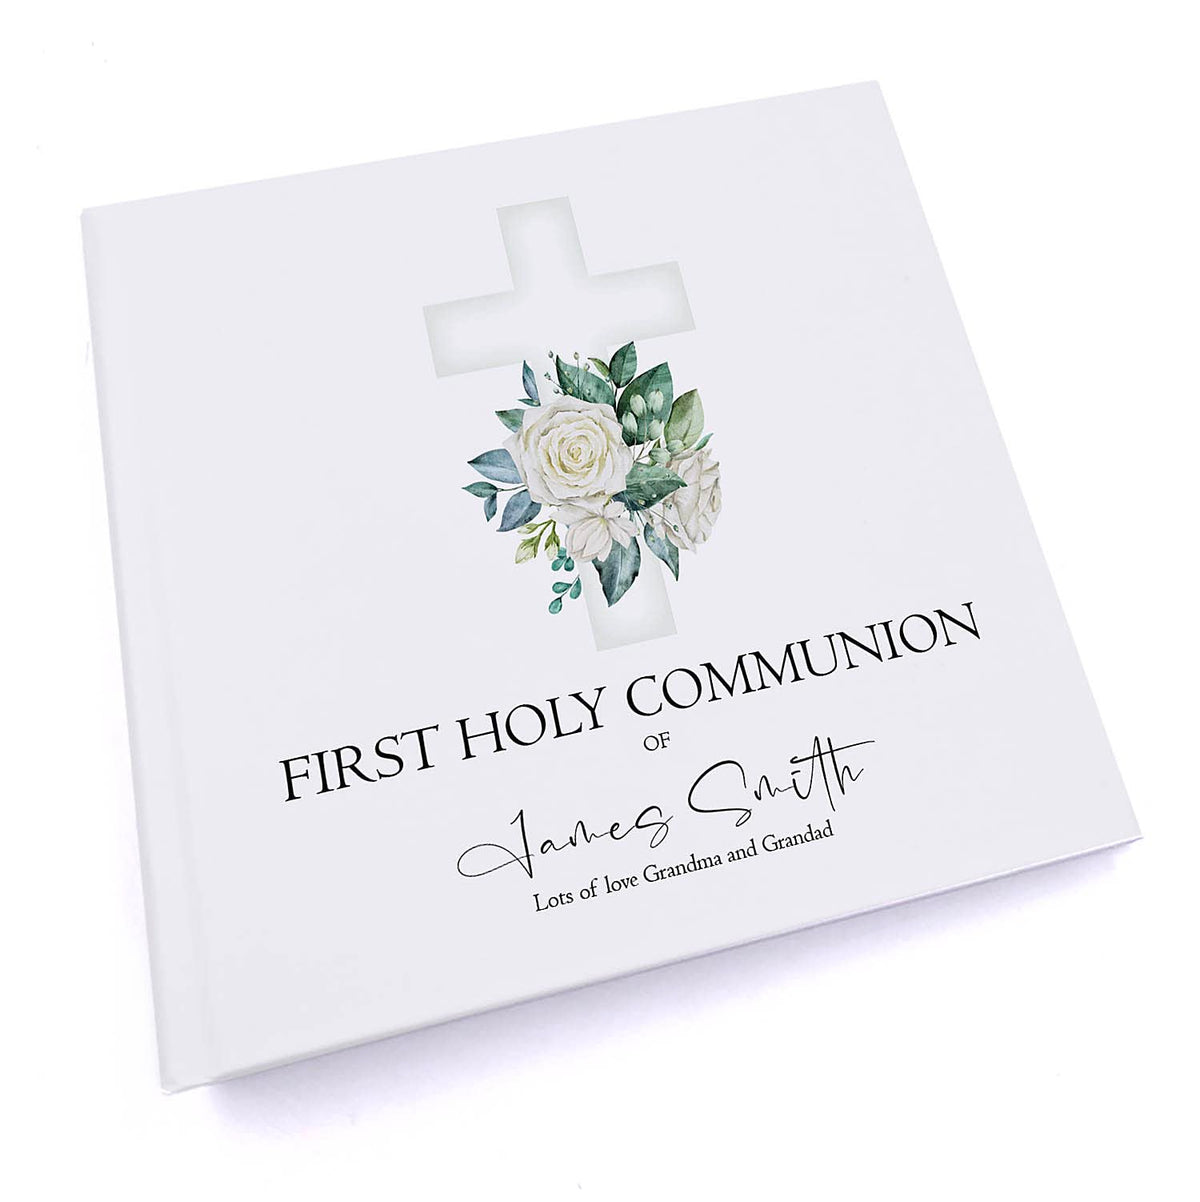 Personalised Communion 6x4" Slip in Photo Album Gift With Green Cross